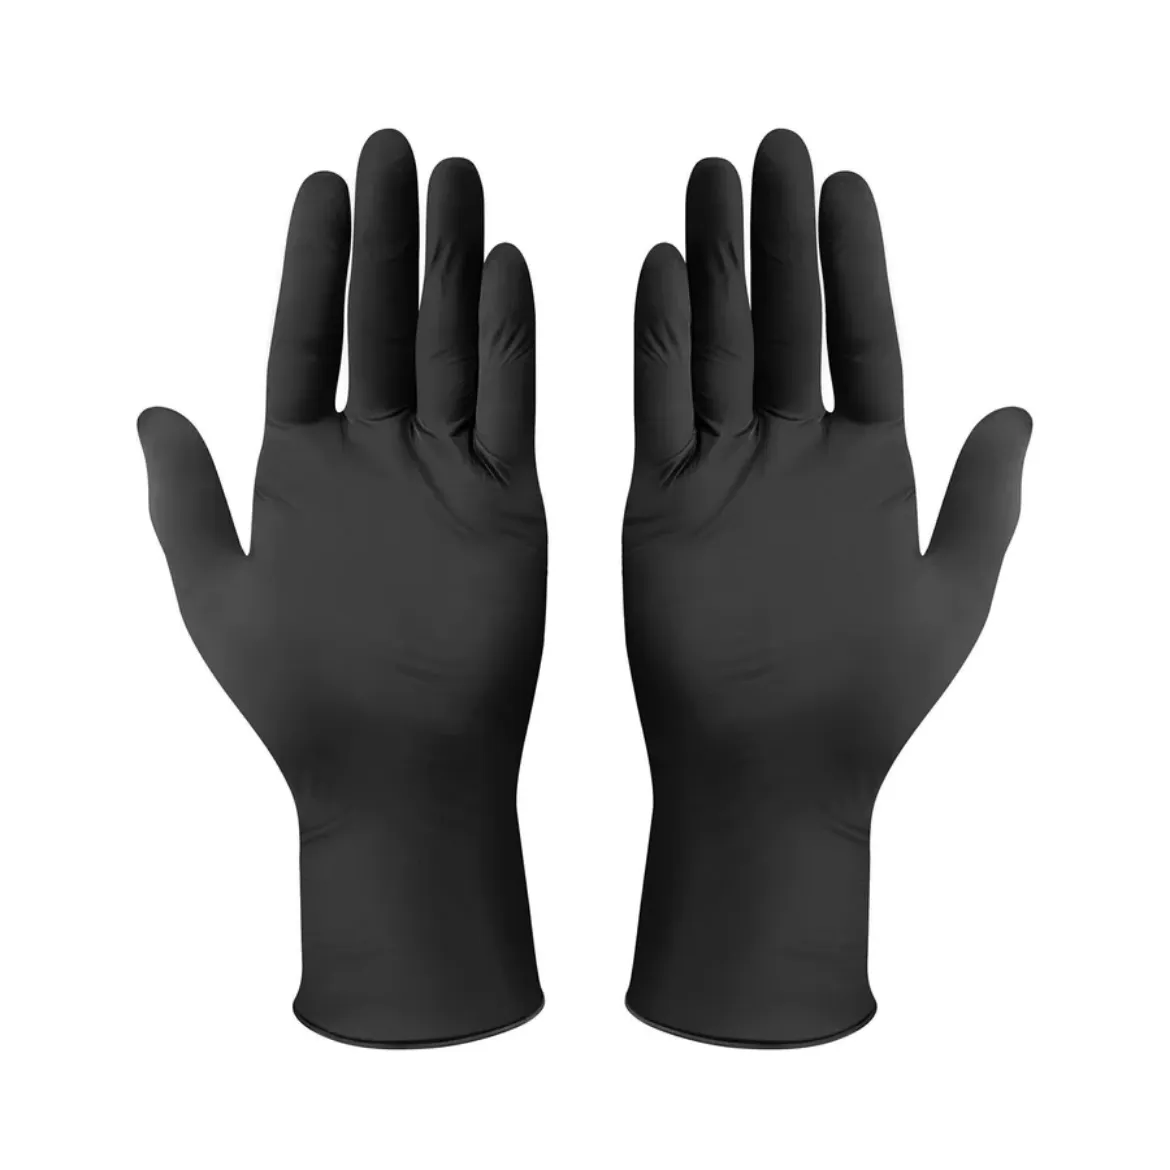 Picture of Nitrile Exam Gloves Black 5mil